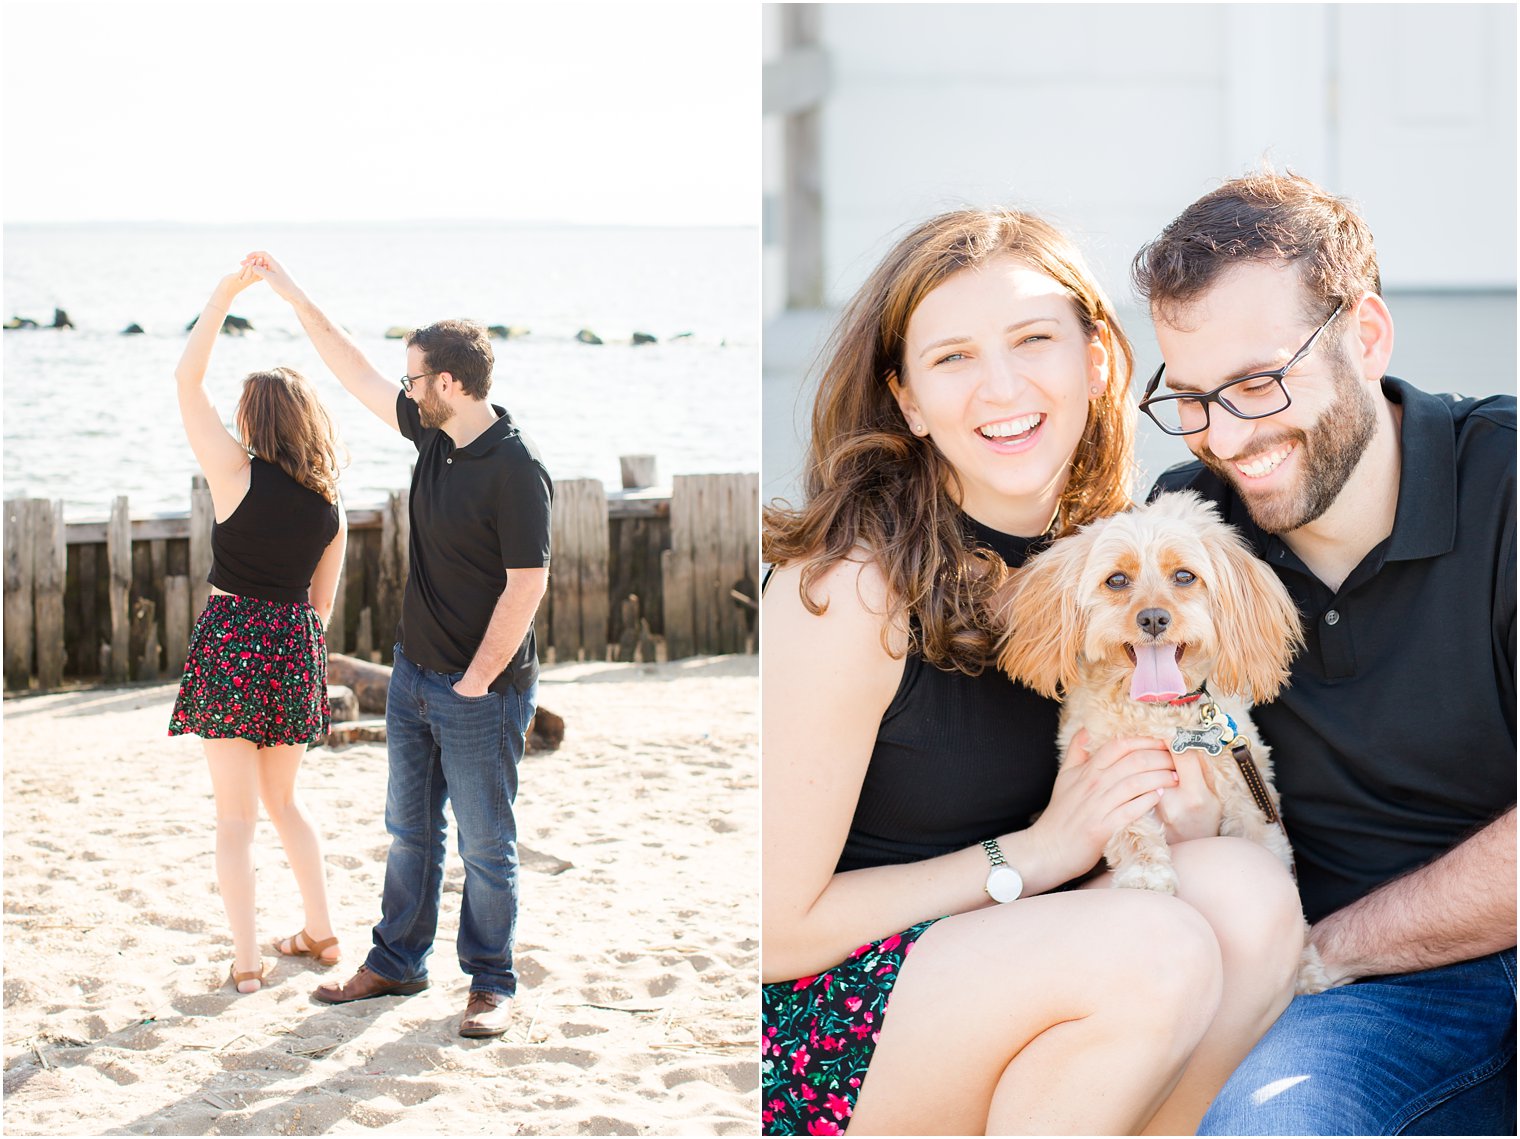 Candid moments between engaged couple at Sandy Hook Engagement Session